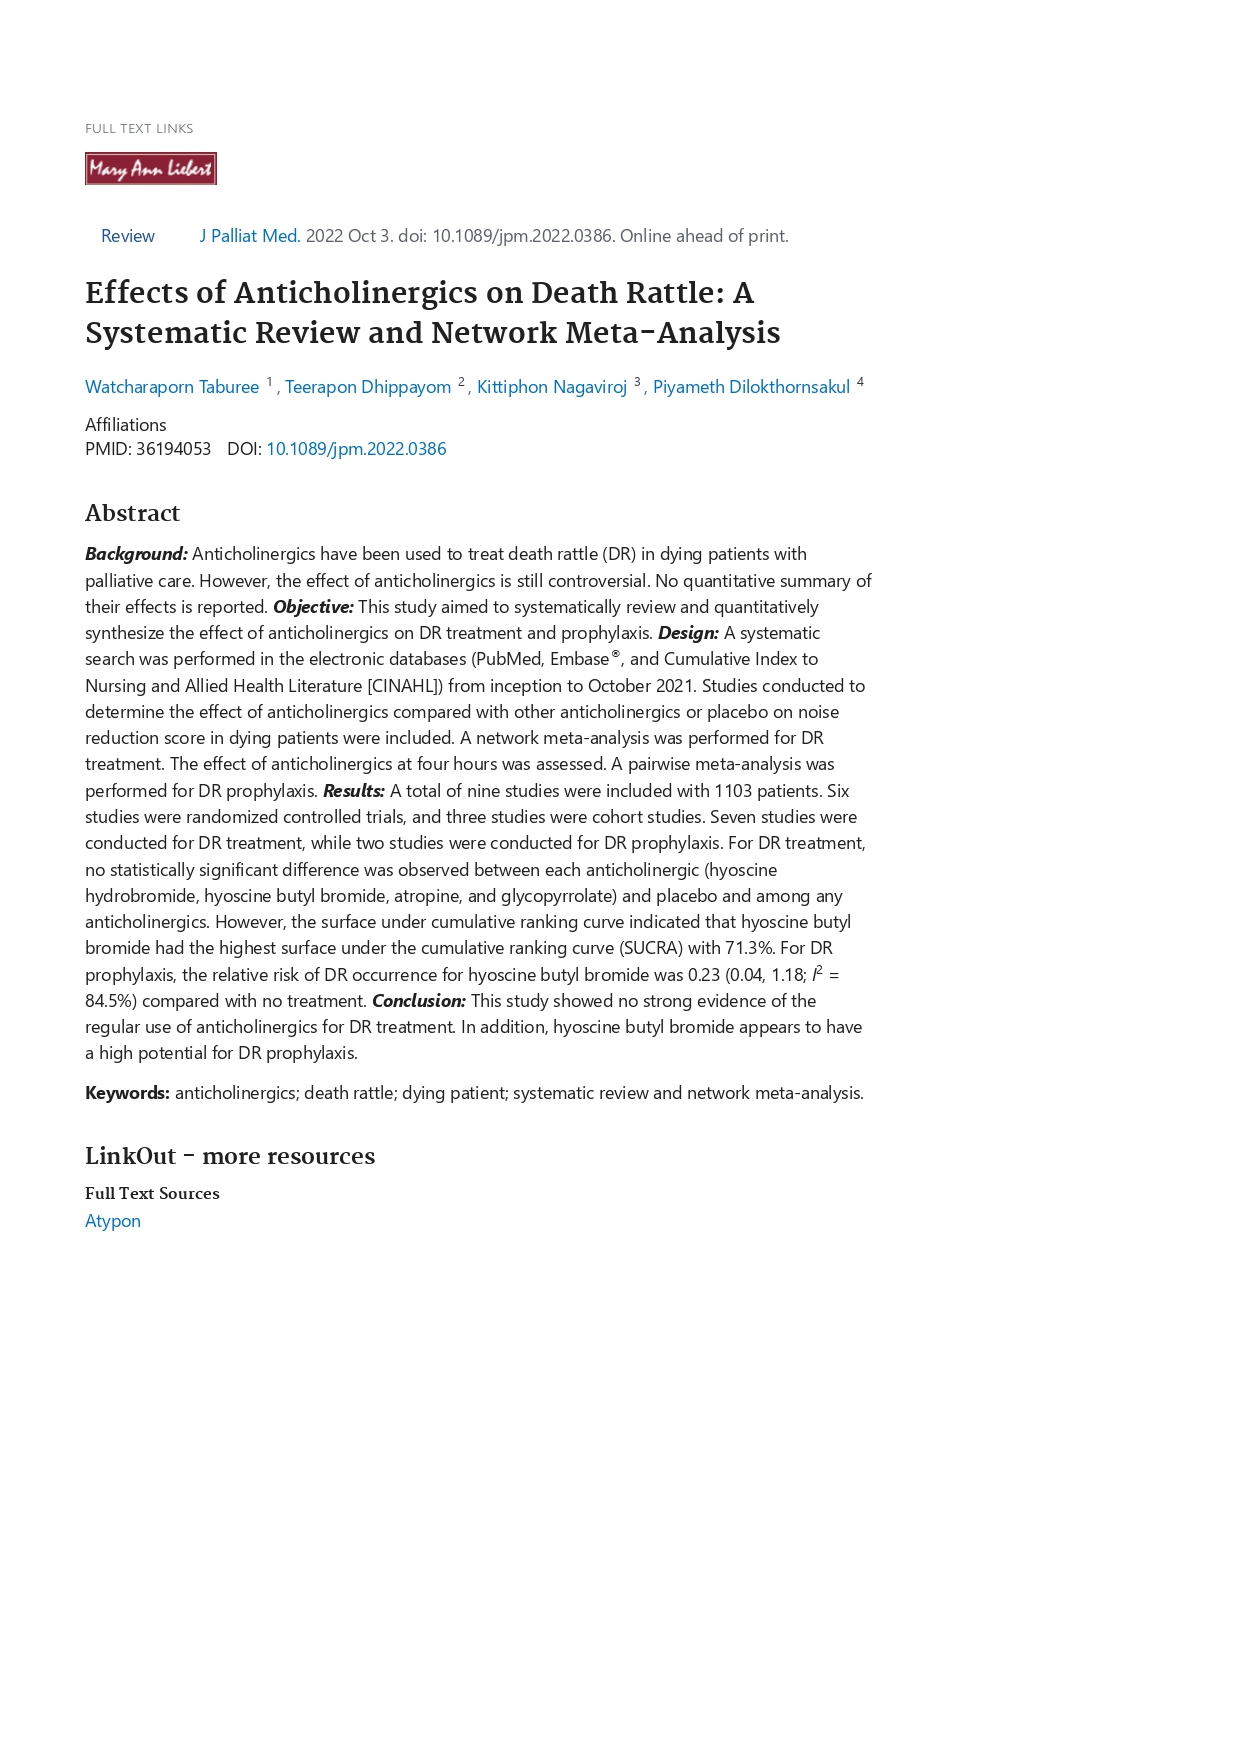 Effects of Anticholinergics on Death Rattle: A Systematic Review and Network Meta-Analysis